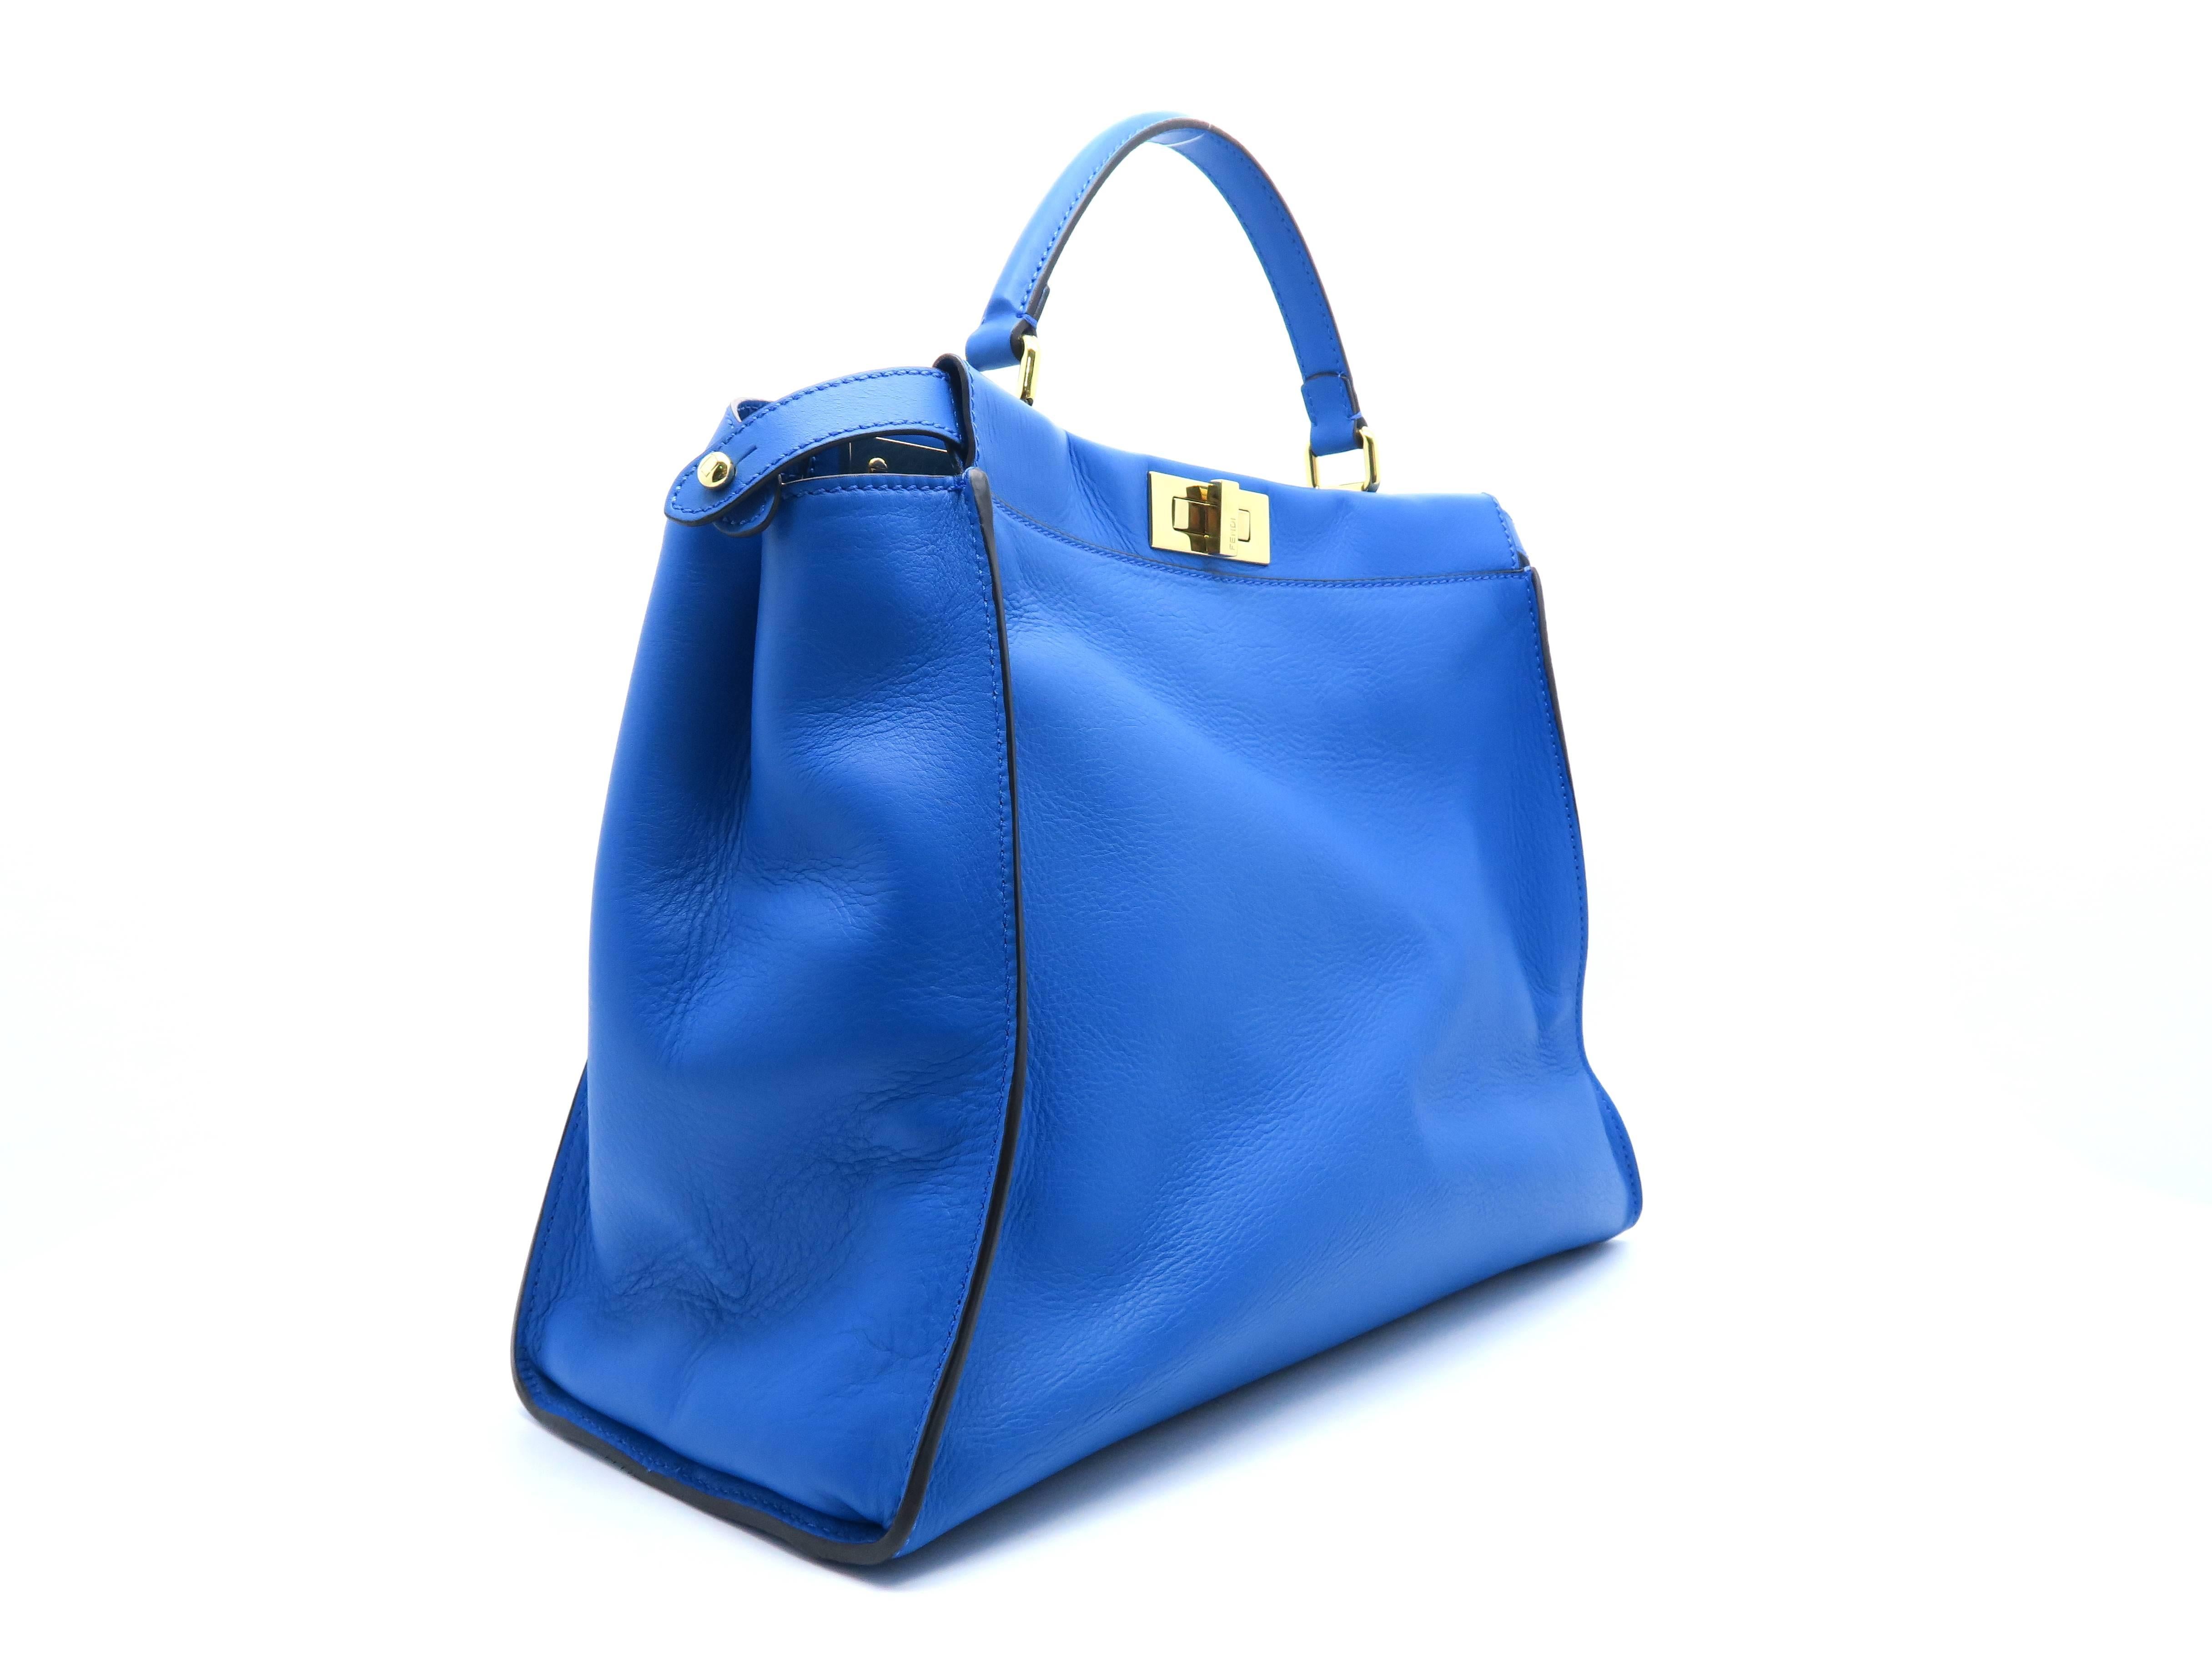 Color: Blue 

Material: Calfskin Leather 

Condition: Rank A 
Overall: Good, few minor defects. 
Surface: Good
Corners: Minor Scratches
Edges: Good
Handles/Straps: Minor Scratches
Hardware: Minor Scratches

Dimension: W40 × H31 ×